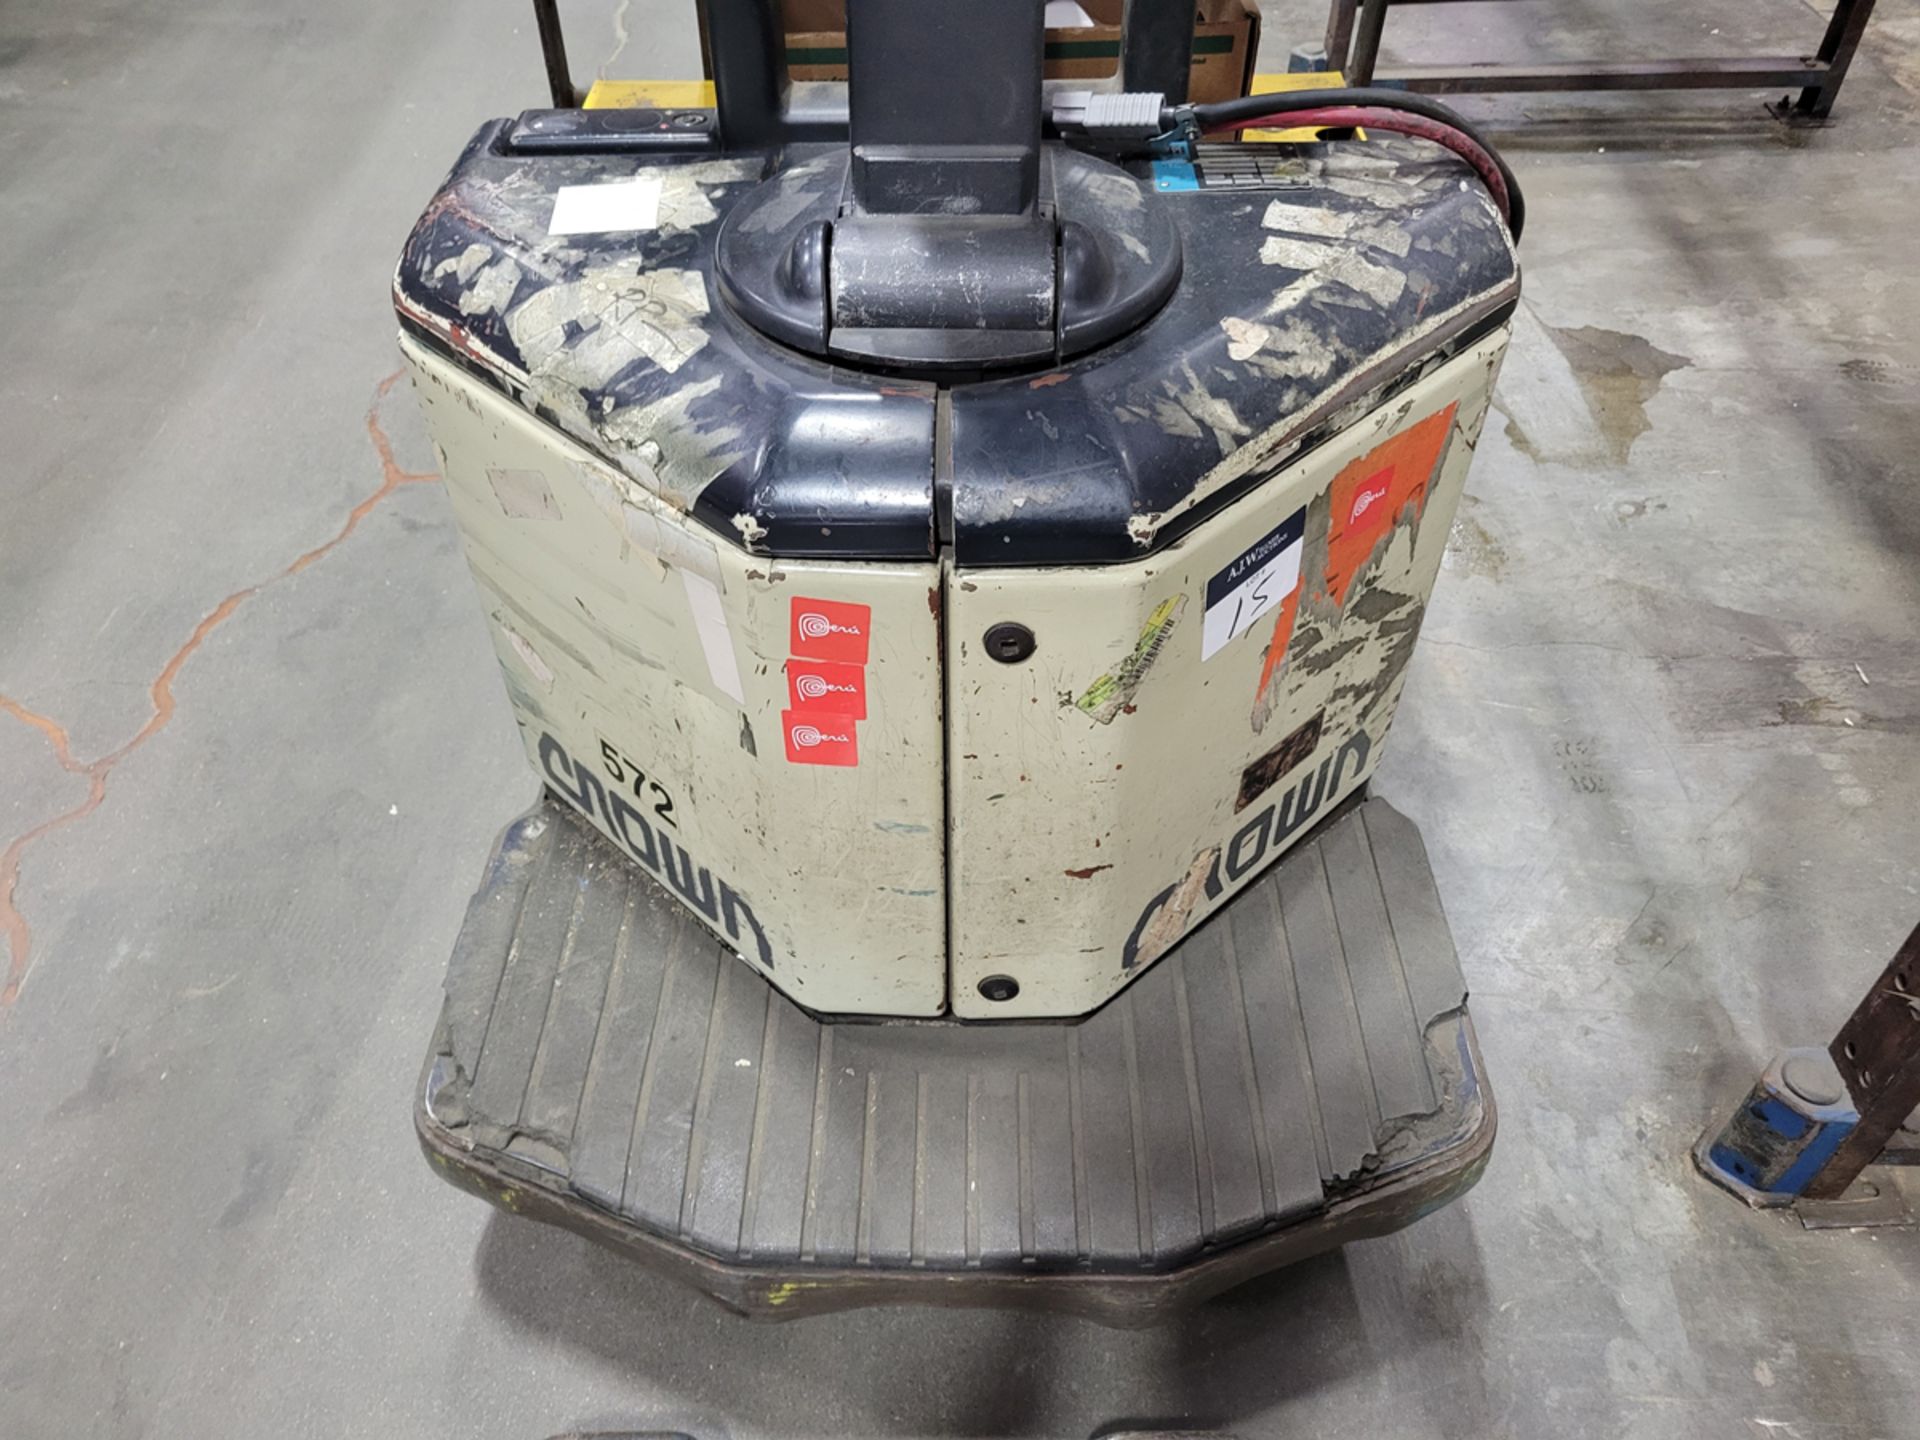 Crown PE3540-60 6,000lbs Electric 24V Rider Pallet Jack w/ Charger - Image 4 of 11